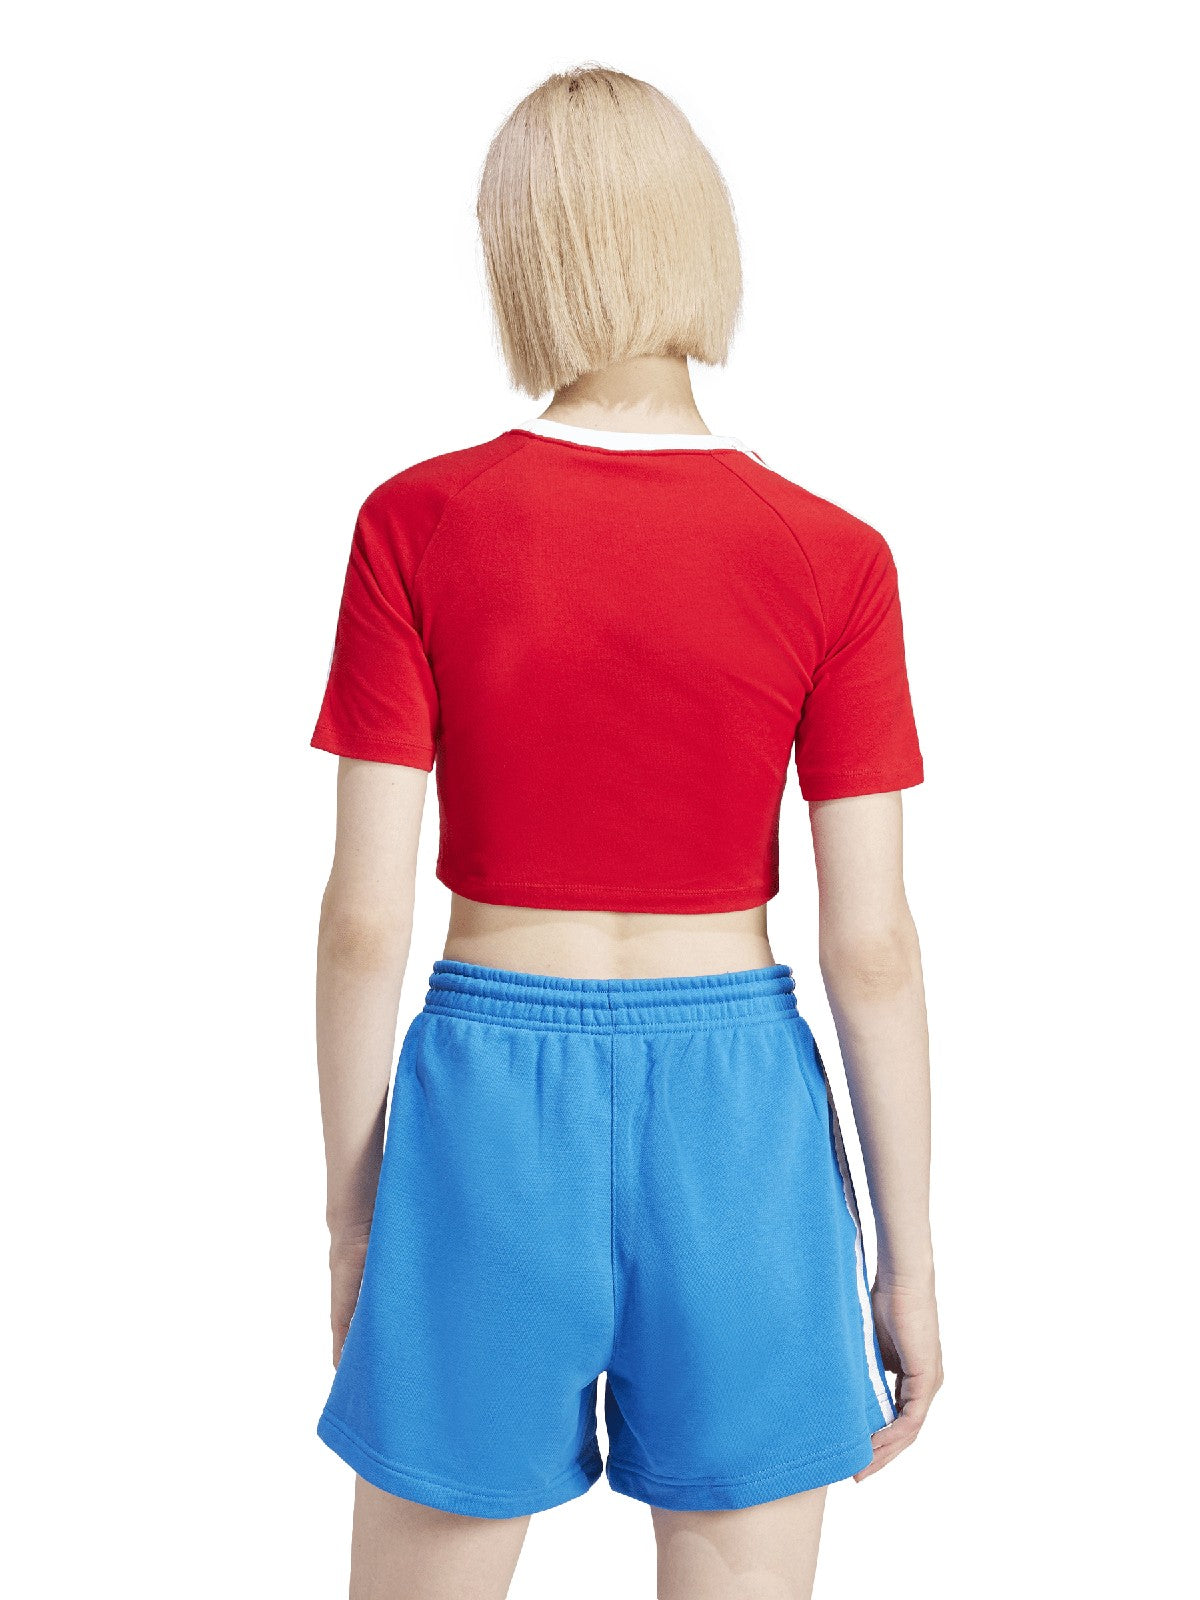 T-shirt Donna Adidas - T-Shirt 3-Stripes Baby Tee - Rosso